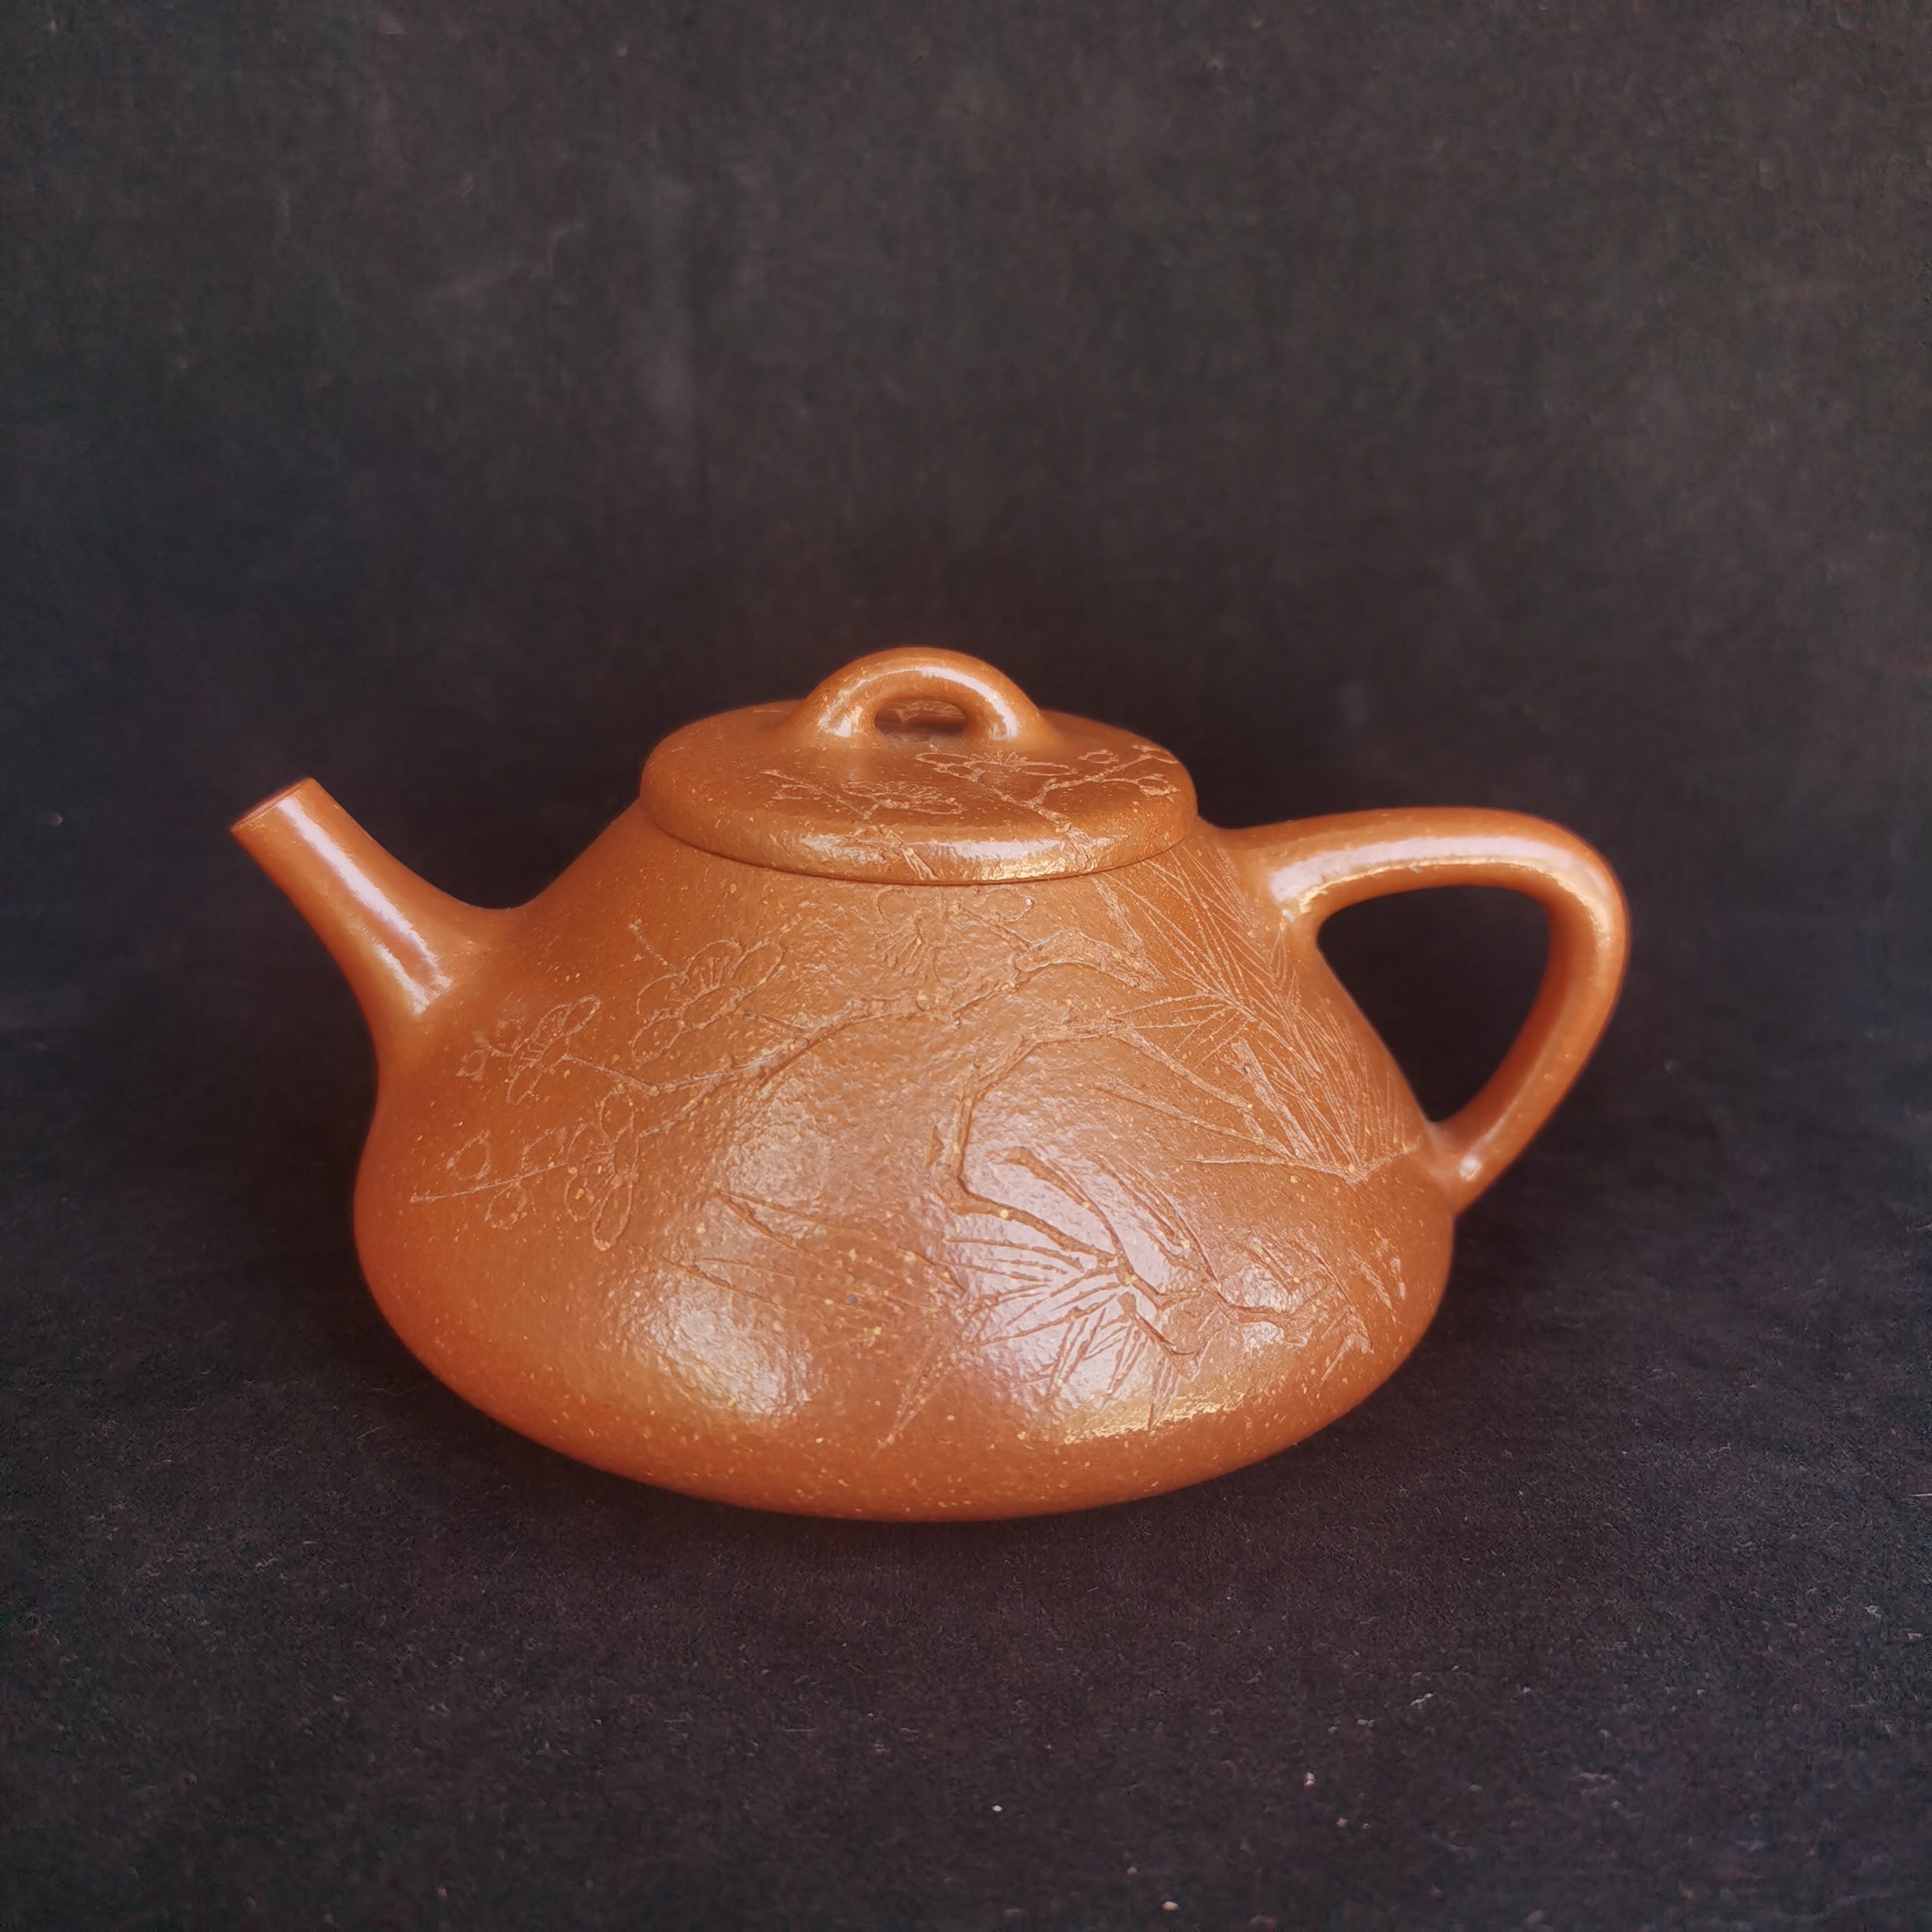 Siyutao Teapot Two friends Piao full Handcrafted 195ml